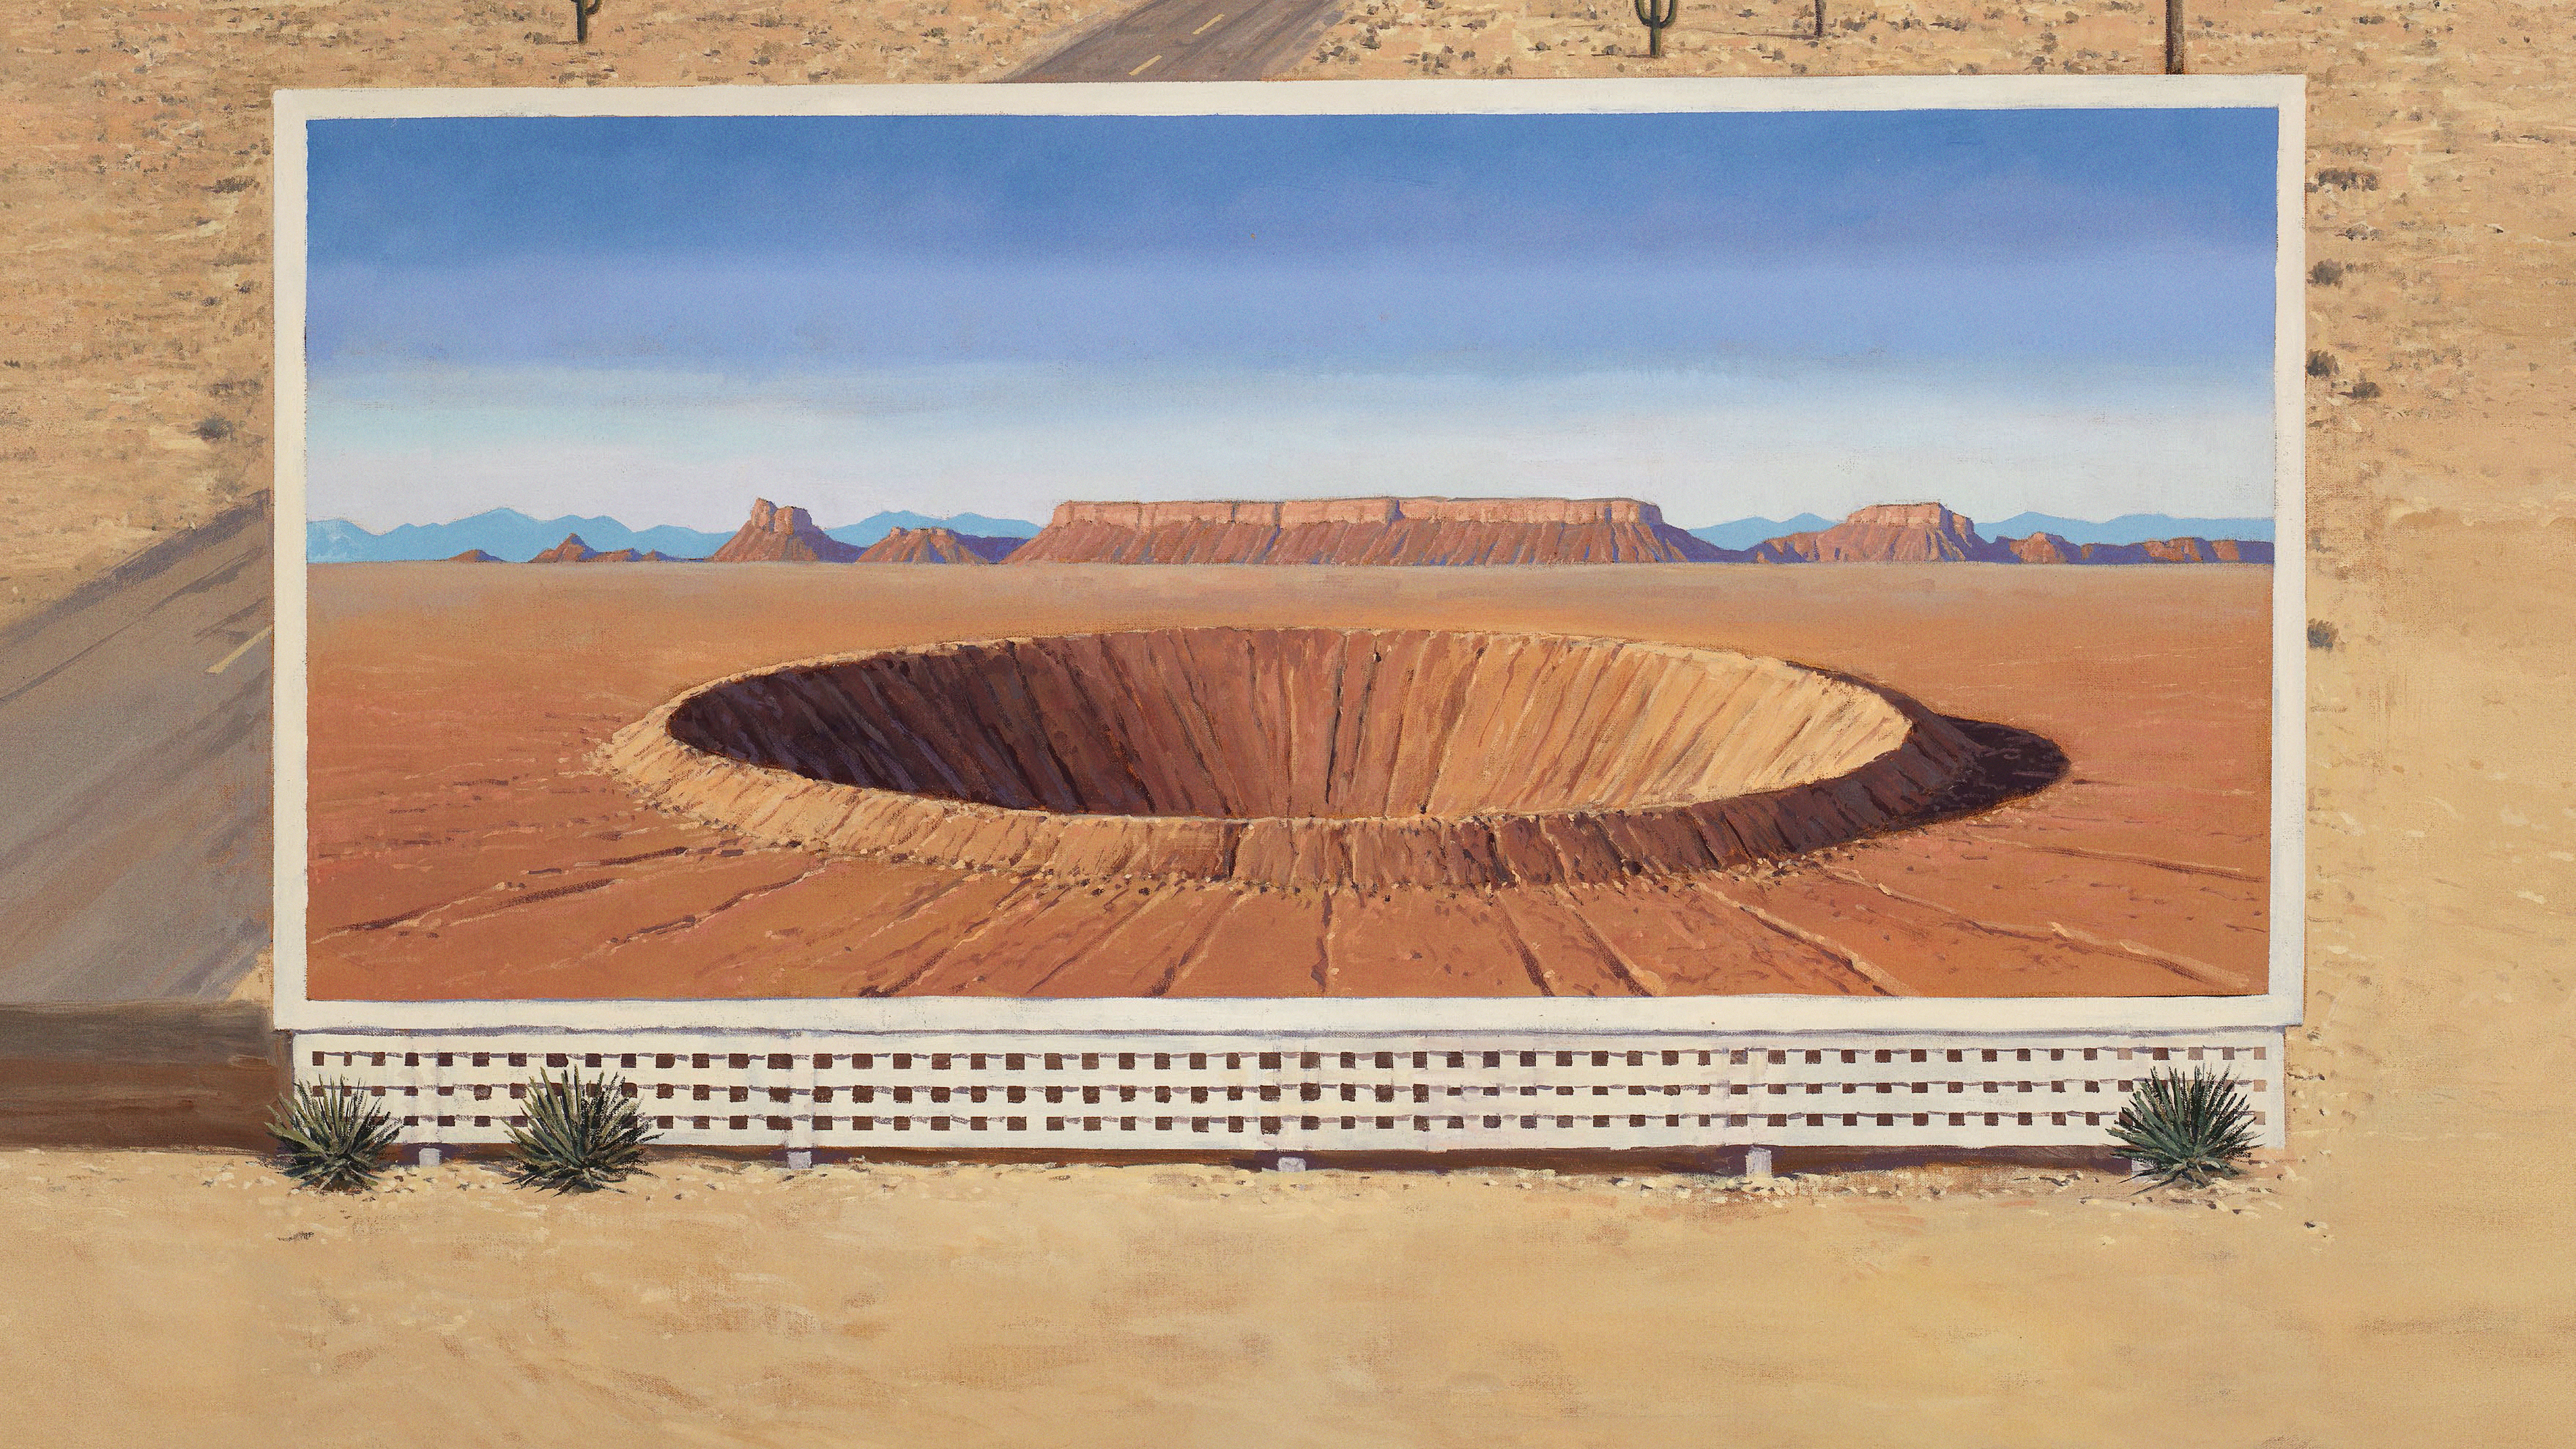 General 3517x1978 Asteroid City (movie) poster movies Wes Anderson digital art desert canyon rock formation asteroid billboards